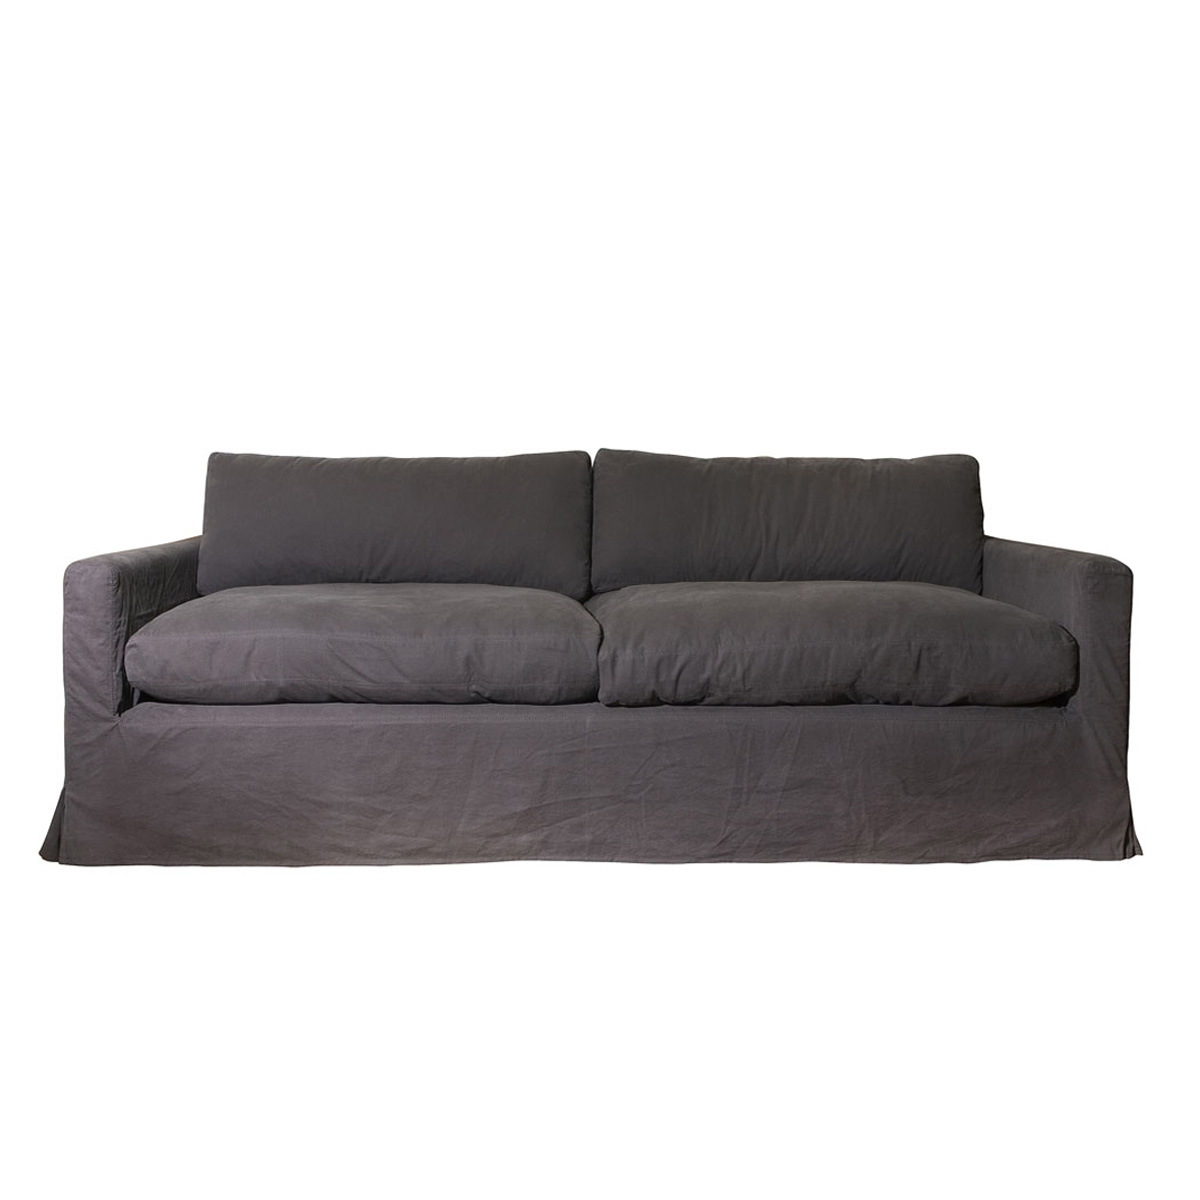 Loose Cover Sofa Lim Co Za, How Much Do Loose Covers For Sofas Cost